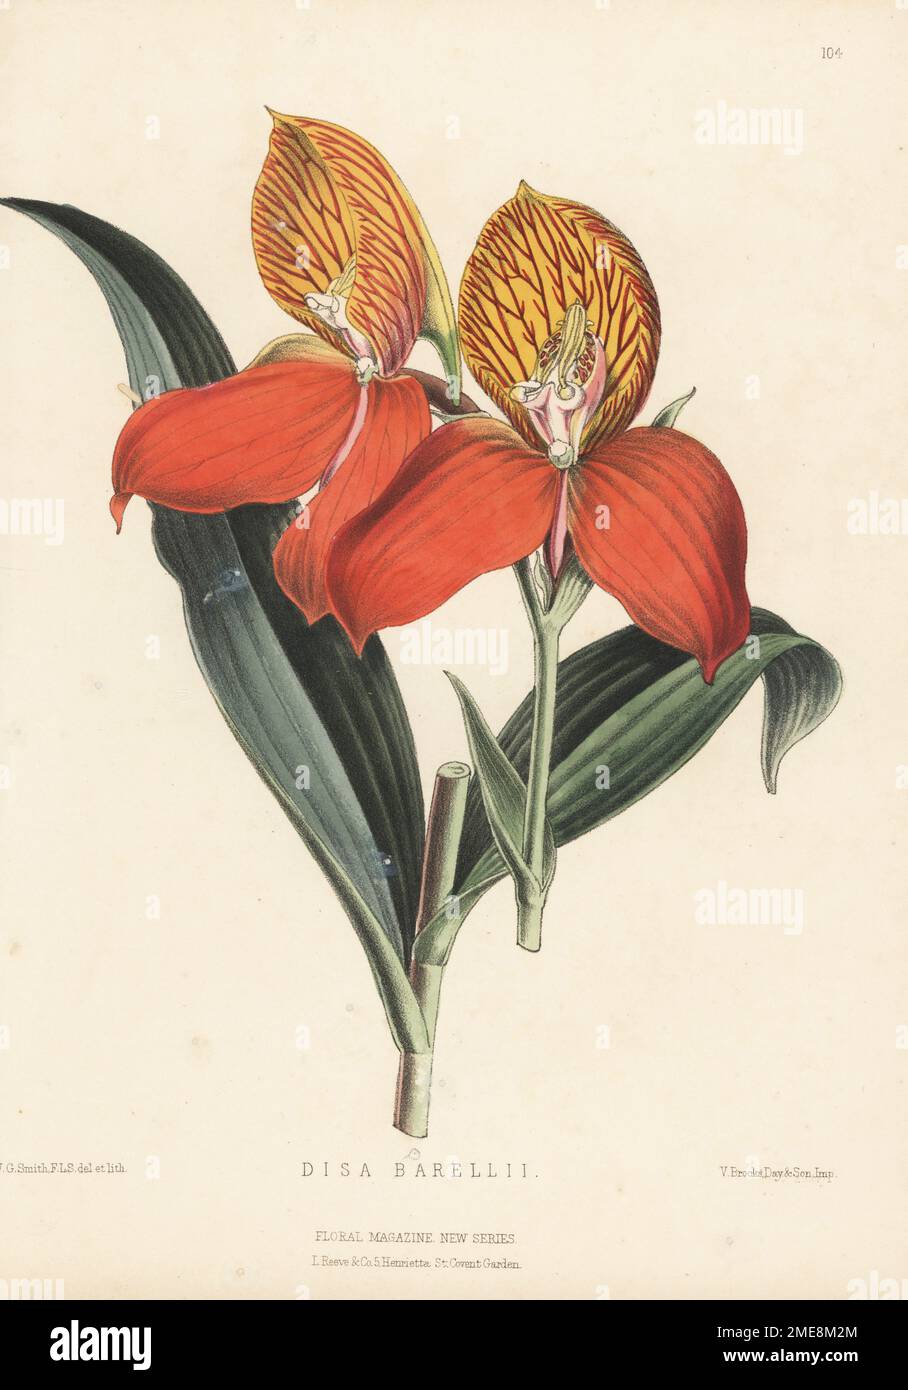 Red disa or pride of Table Mountain orchid, Disa uniflora. Imported from the Fransborck mountains, Cape of Good Hope, South Africa, by William Bull, King's Road, Chelsea. Flowered by Mr Vair, gardener to R. H. Nevill at Dangstein. As Disa barellii. Handcolored botanical illustration drawn and lithographed by Worthington George Smith from Henry Honywood Dombrain's Floral Magazine, New Series, Volume 3, L. Reeve, London, 1874. Lithograph printed by Vincent Brooks, Day & Son. Stock Photo